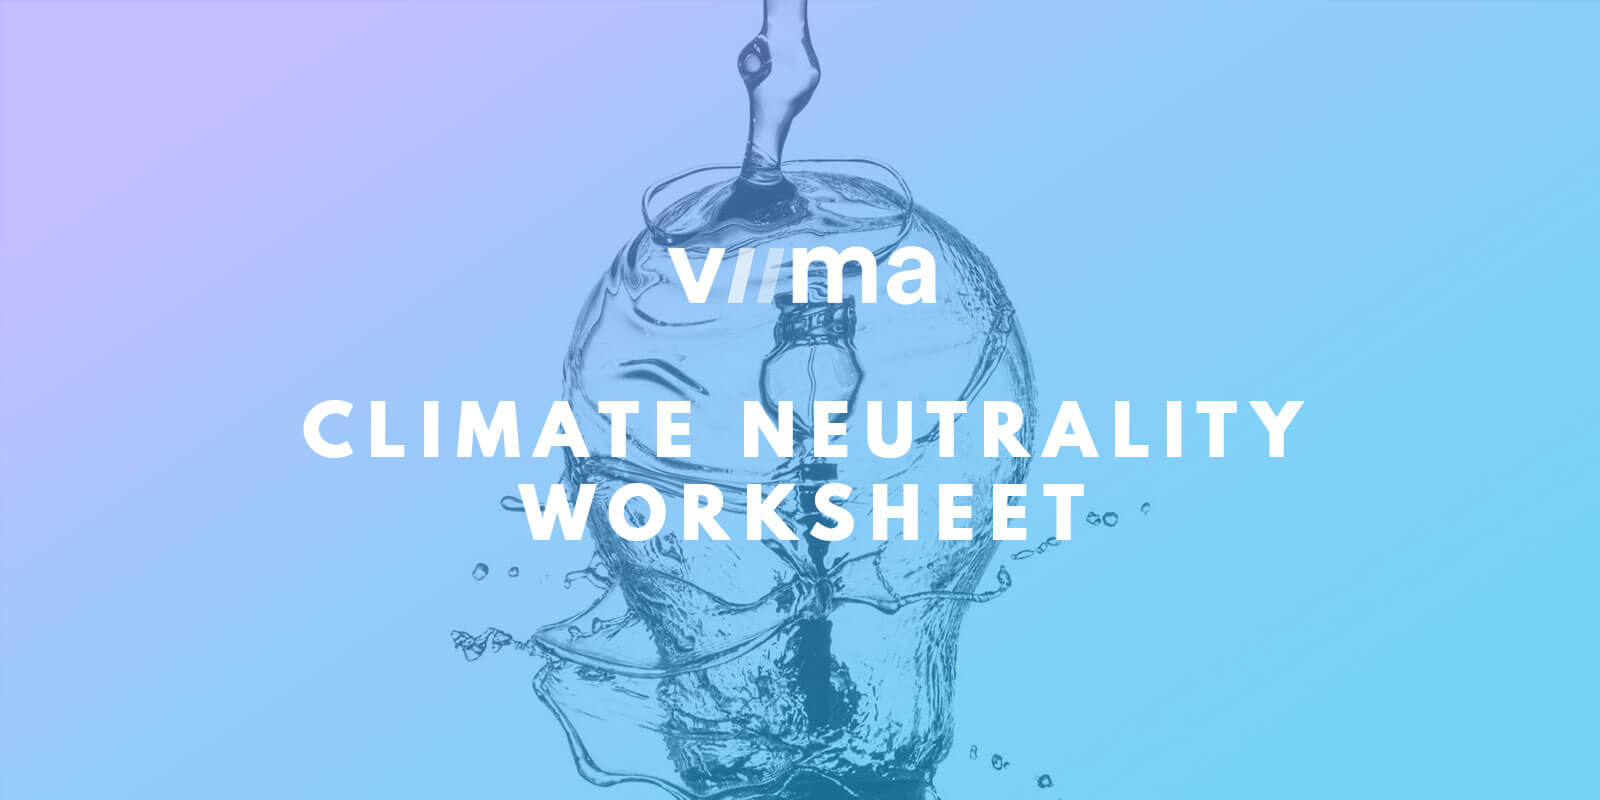 Climate Neutrality Worksheet can be used to calculate and track the carbon footprint of your organization